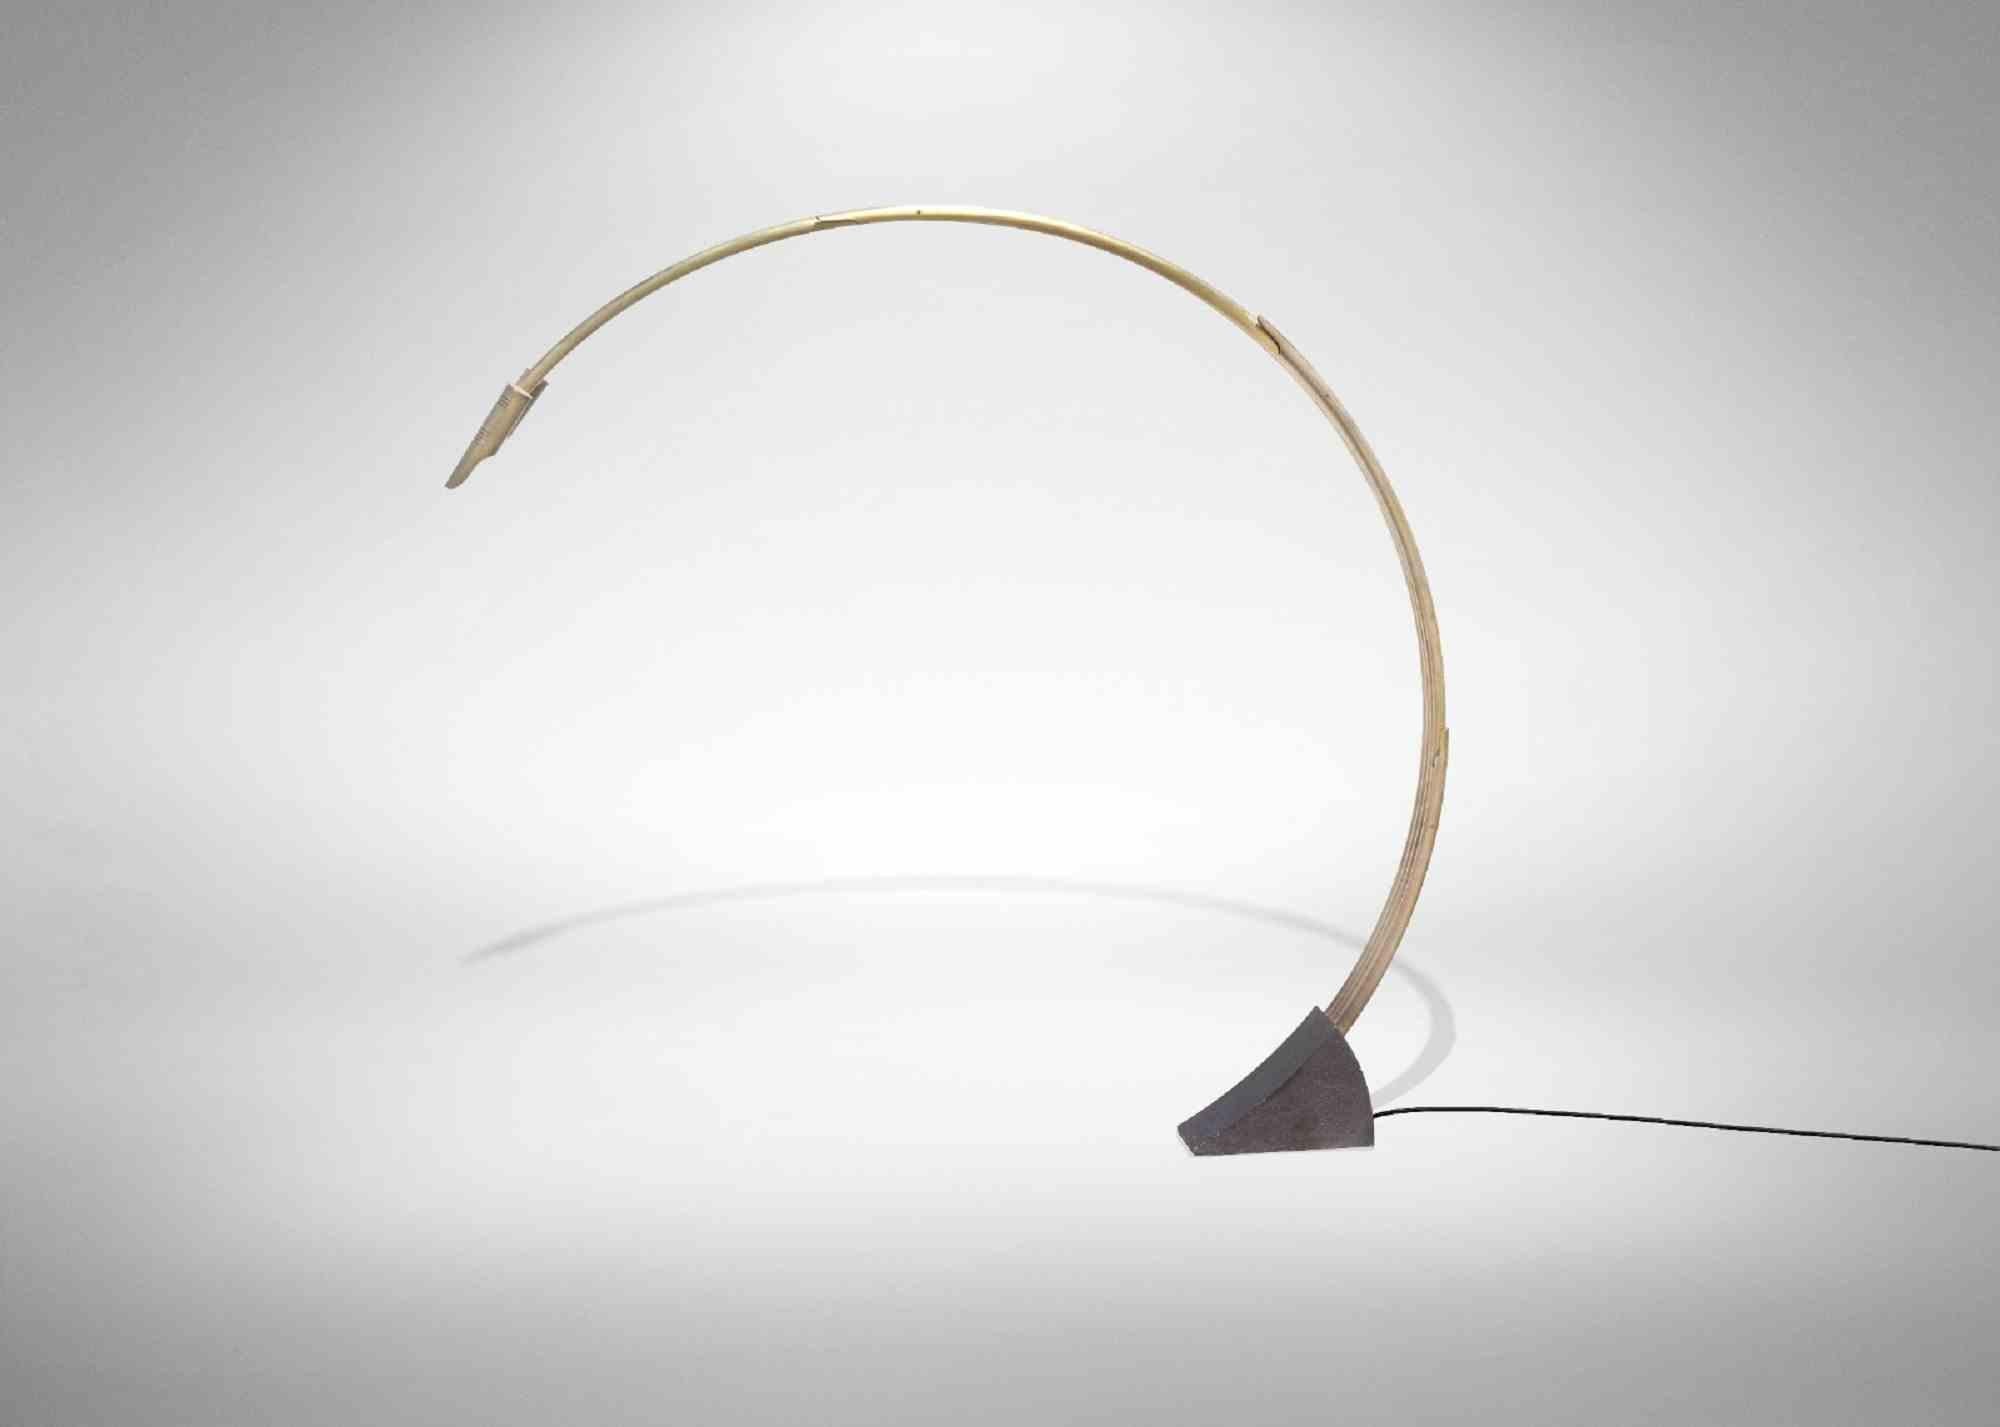 Vintage floor lamp is an original contemporary Artwork realized in Italy in the 1970s by Goffredo Reggiani. 

A Brass lamp with curved body and with base in cast iron

Made in Italy.

Goffredo Reggiani founded his eponymous lighting factory in